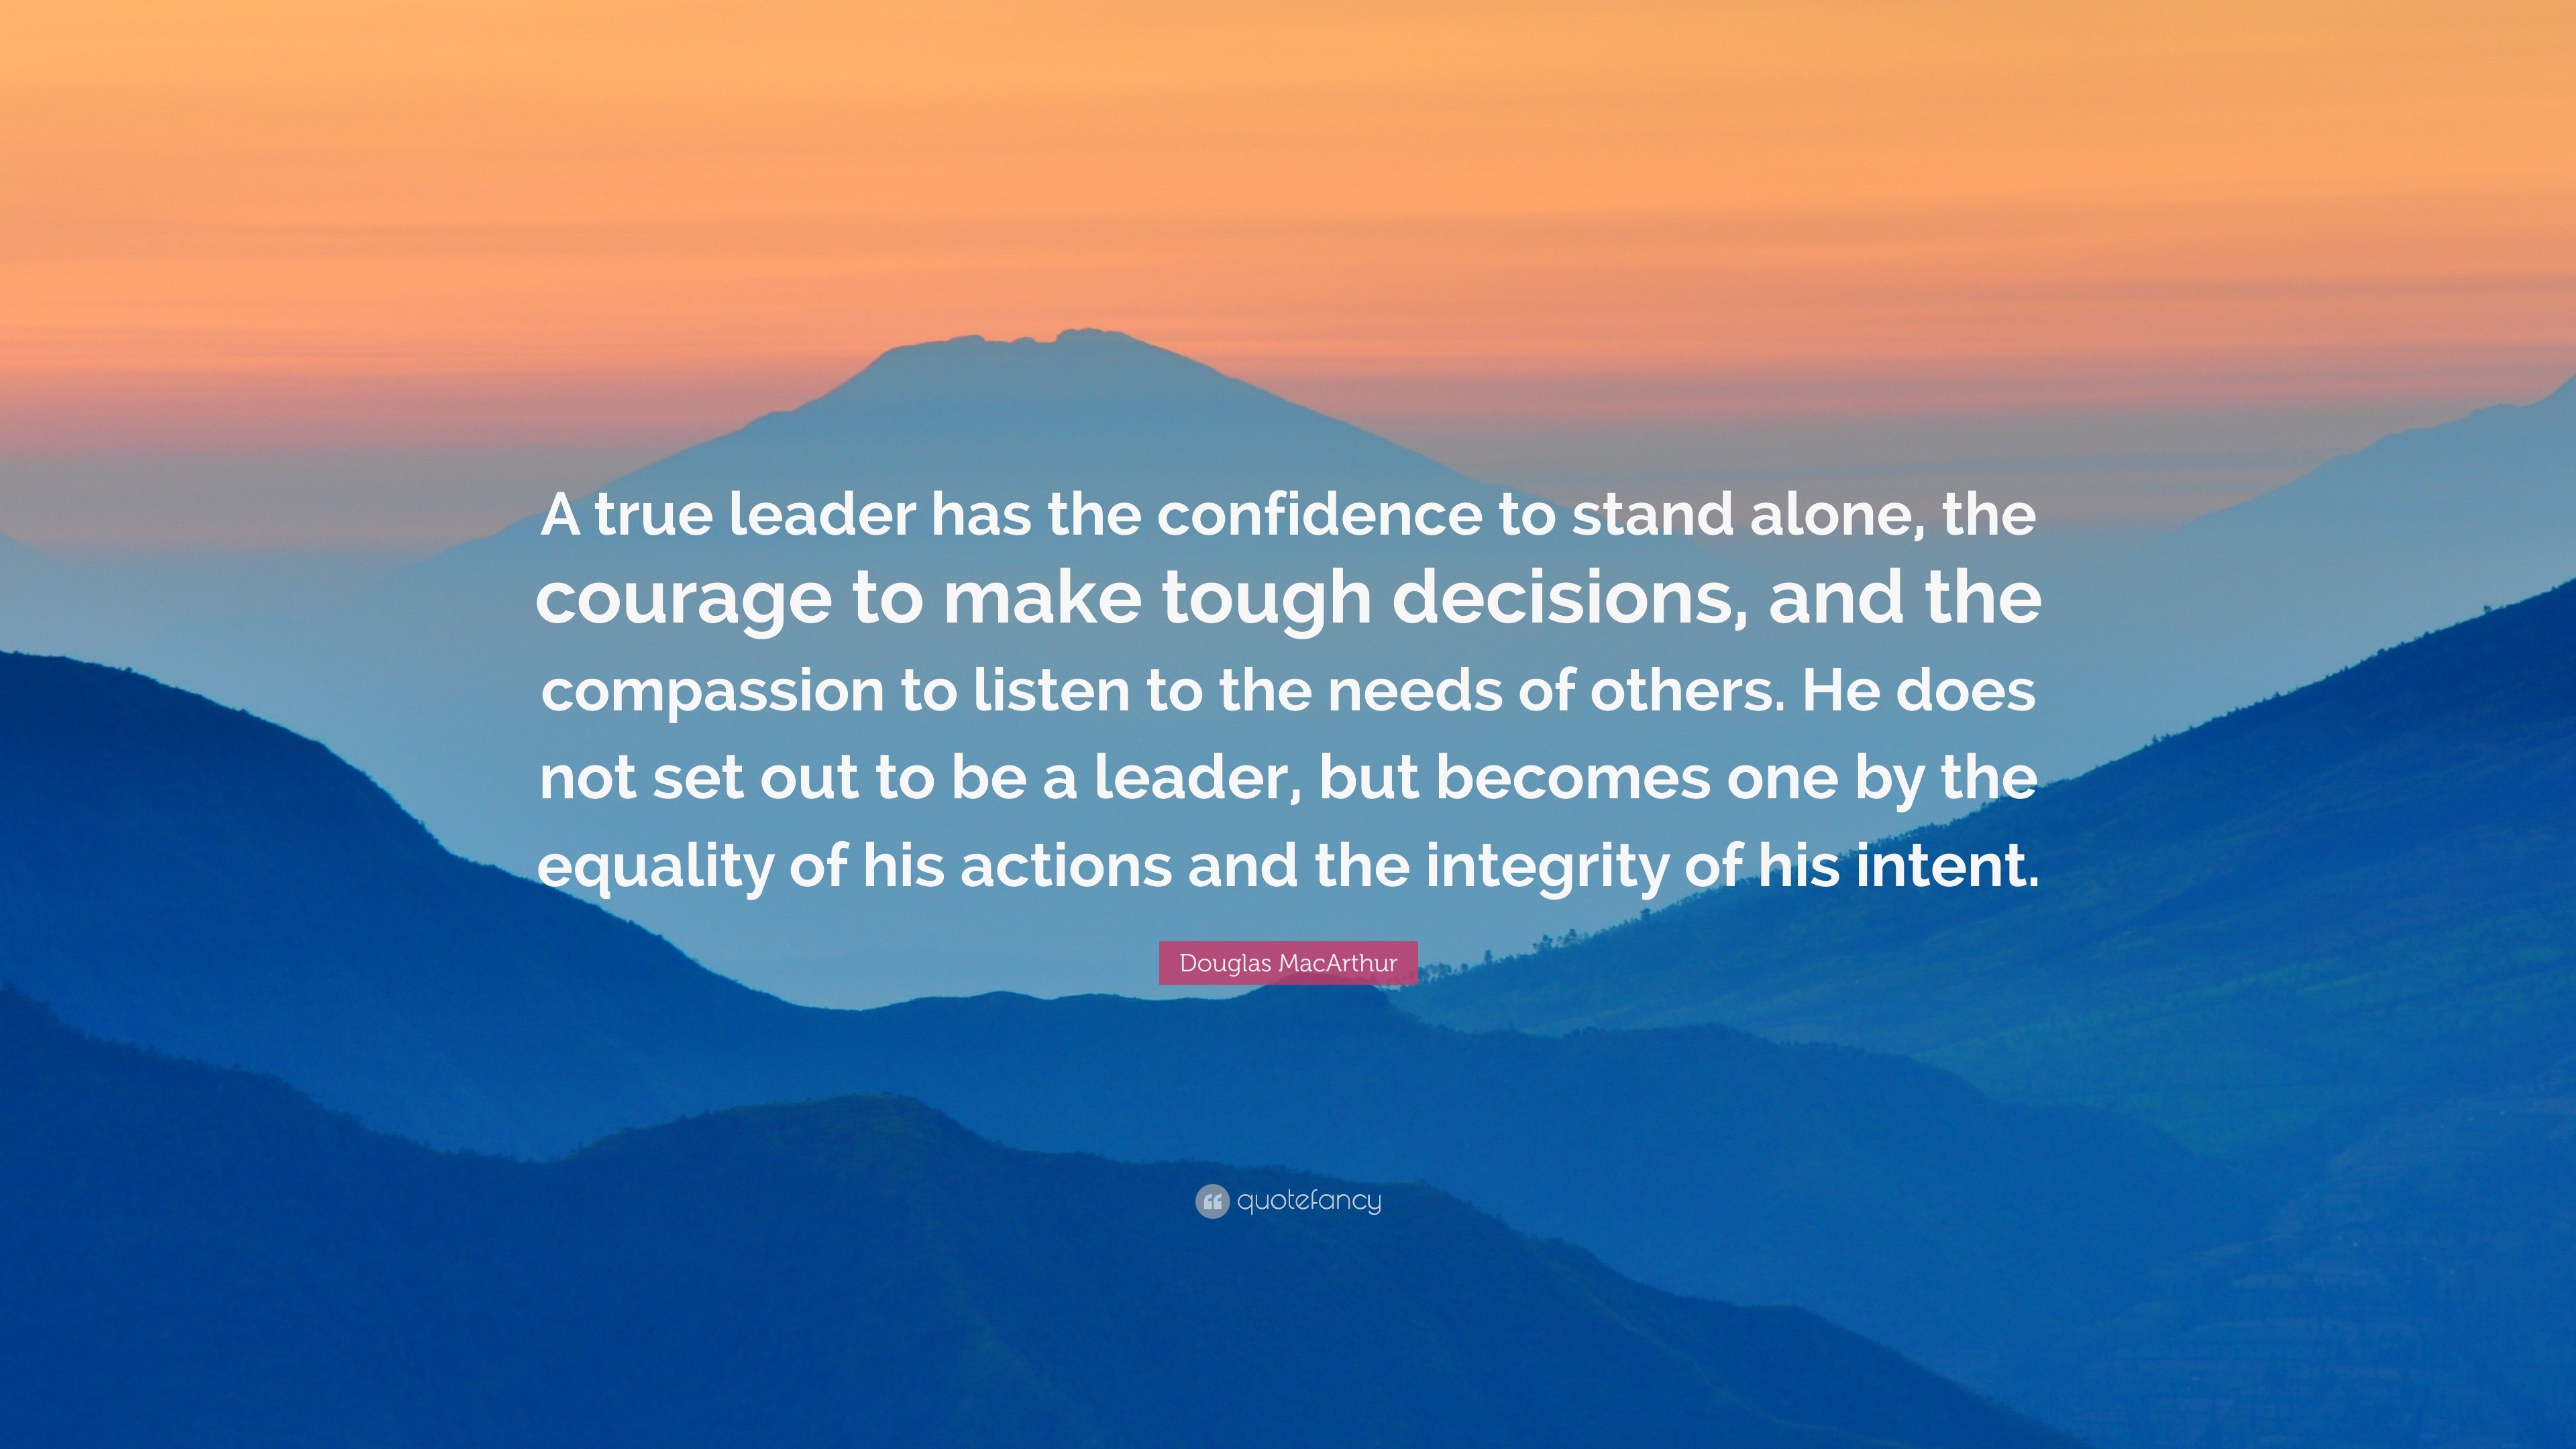 Leadership Quotes (100 wallpapers) - Quotefancy